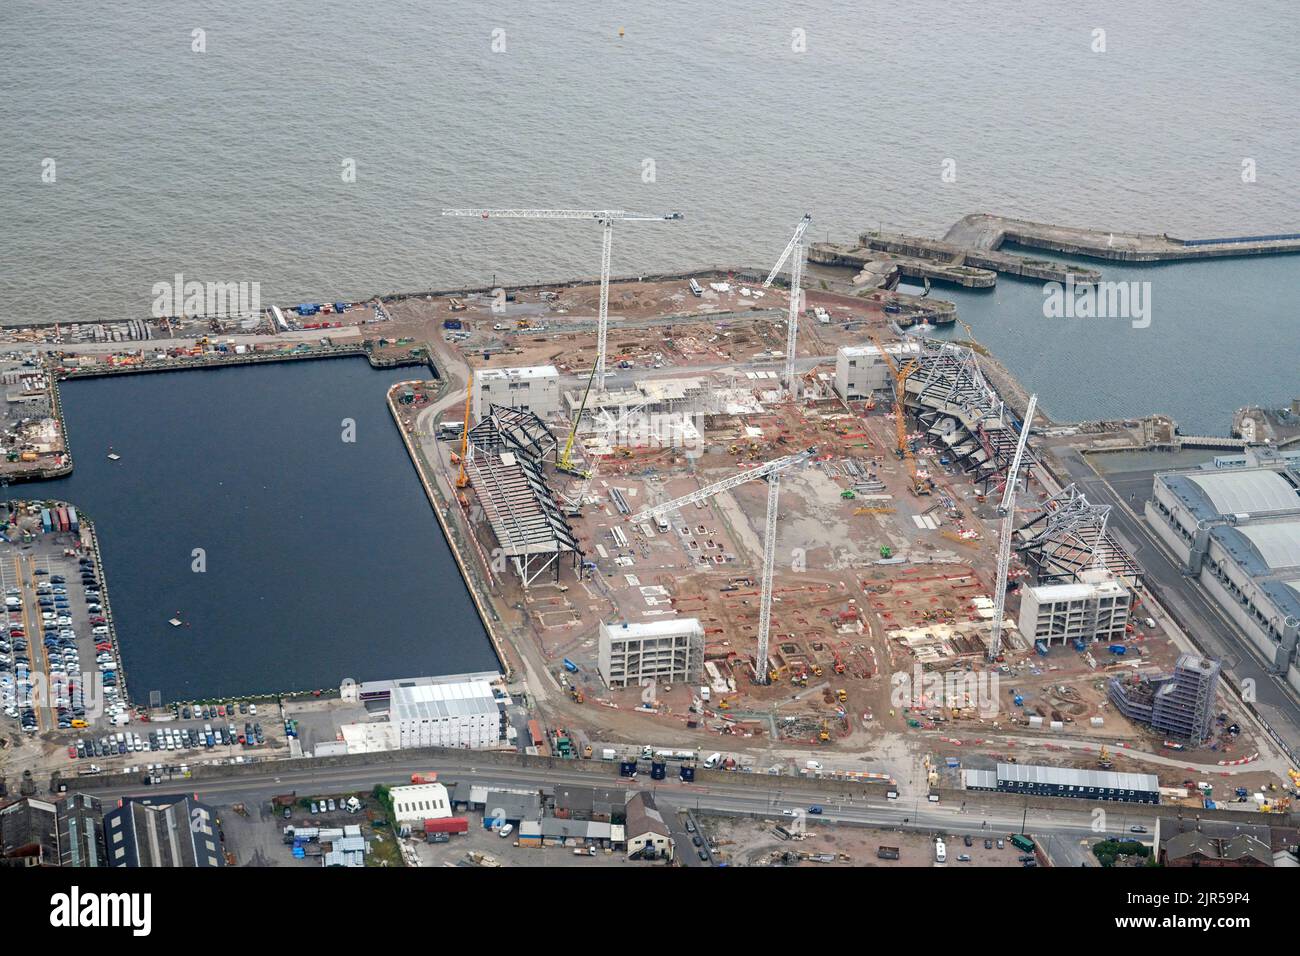 an aerial view of the new Everton Stadium under construction, Seaforth Docks, Merseyside, Liverpool, north west England Stock Photo